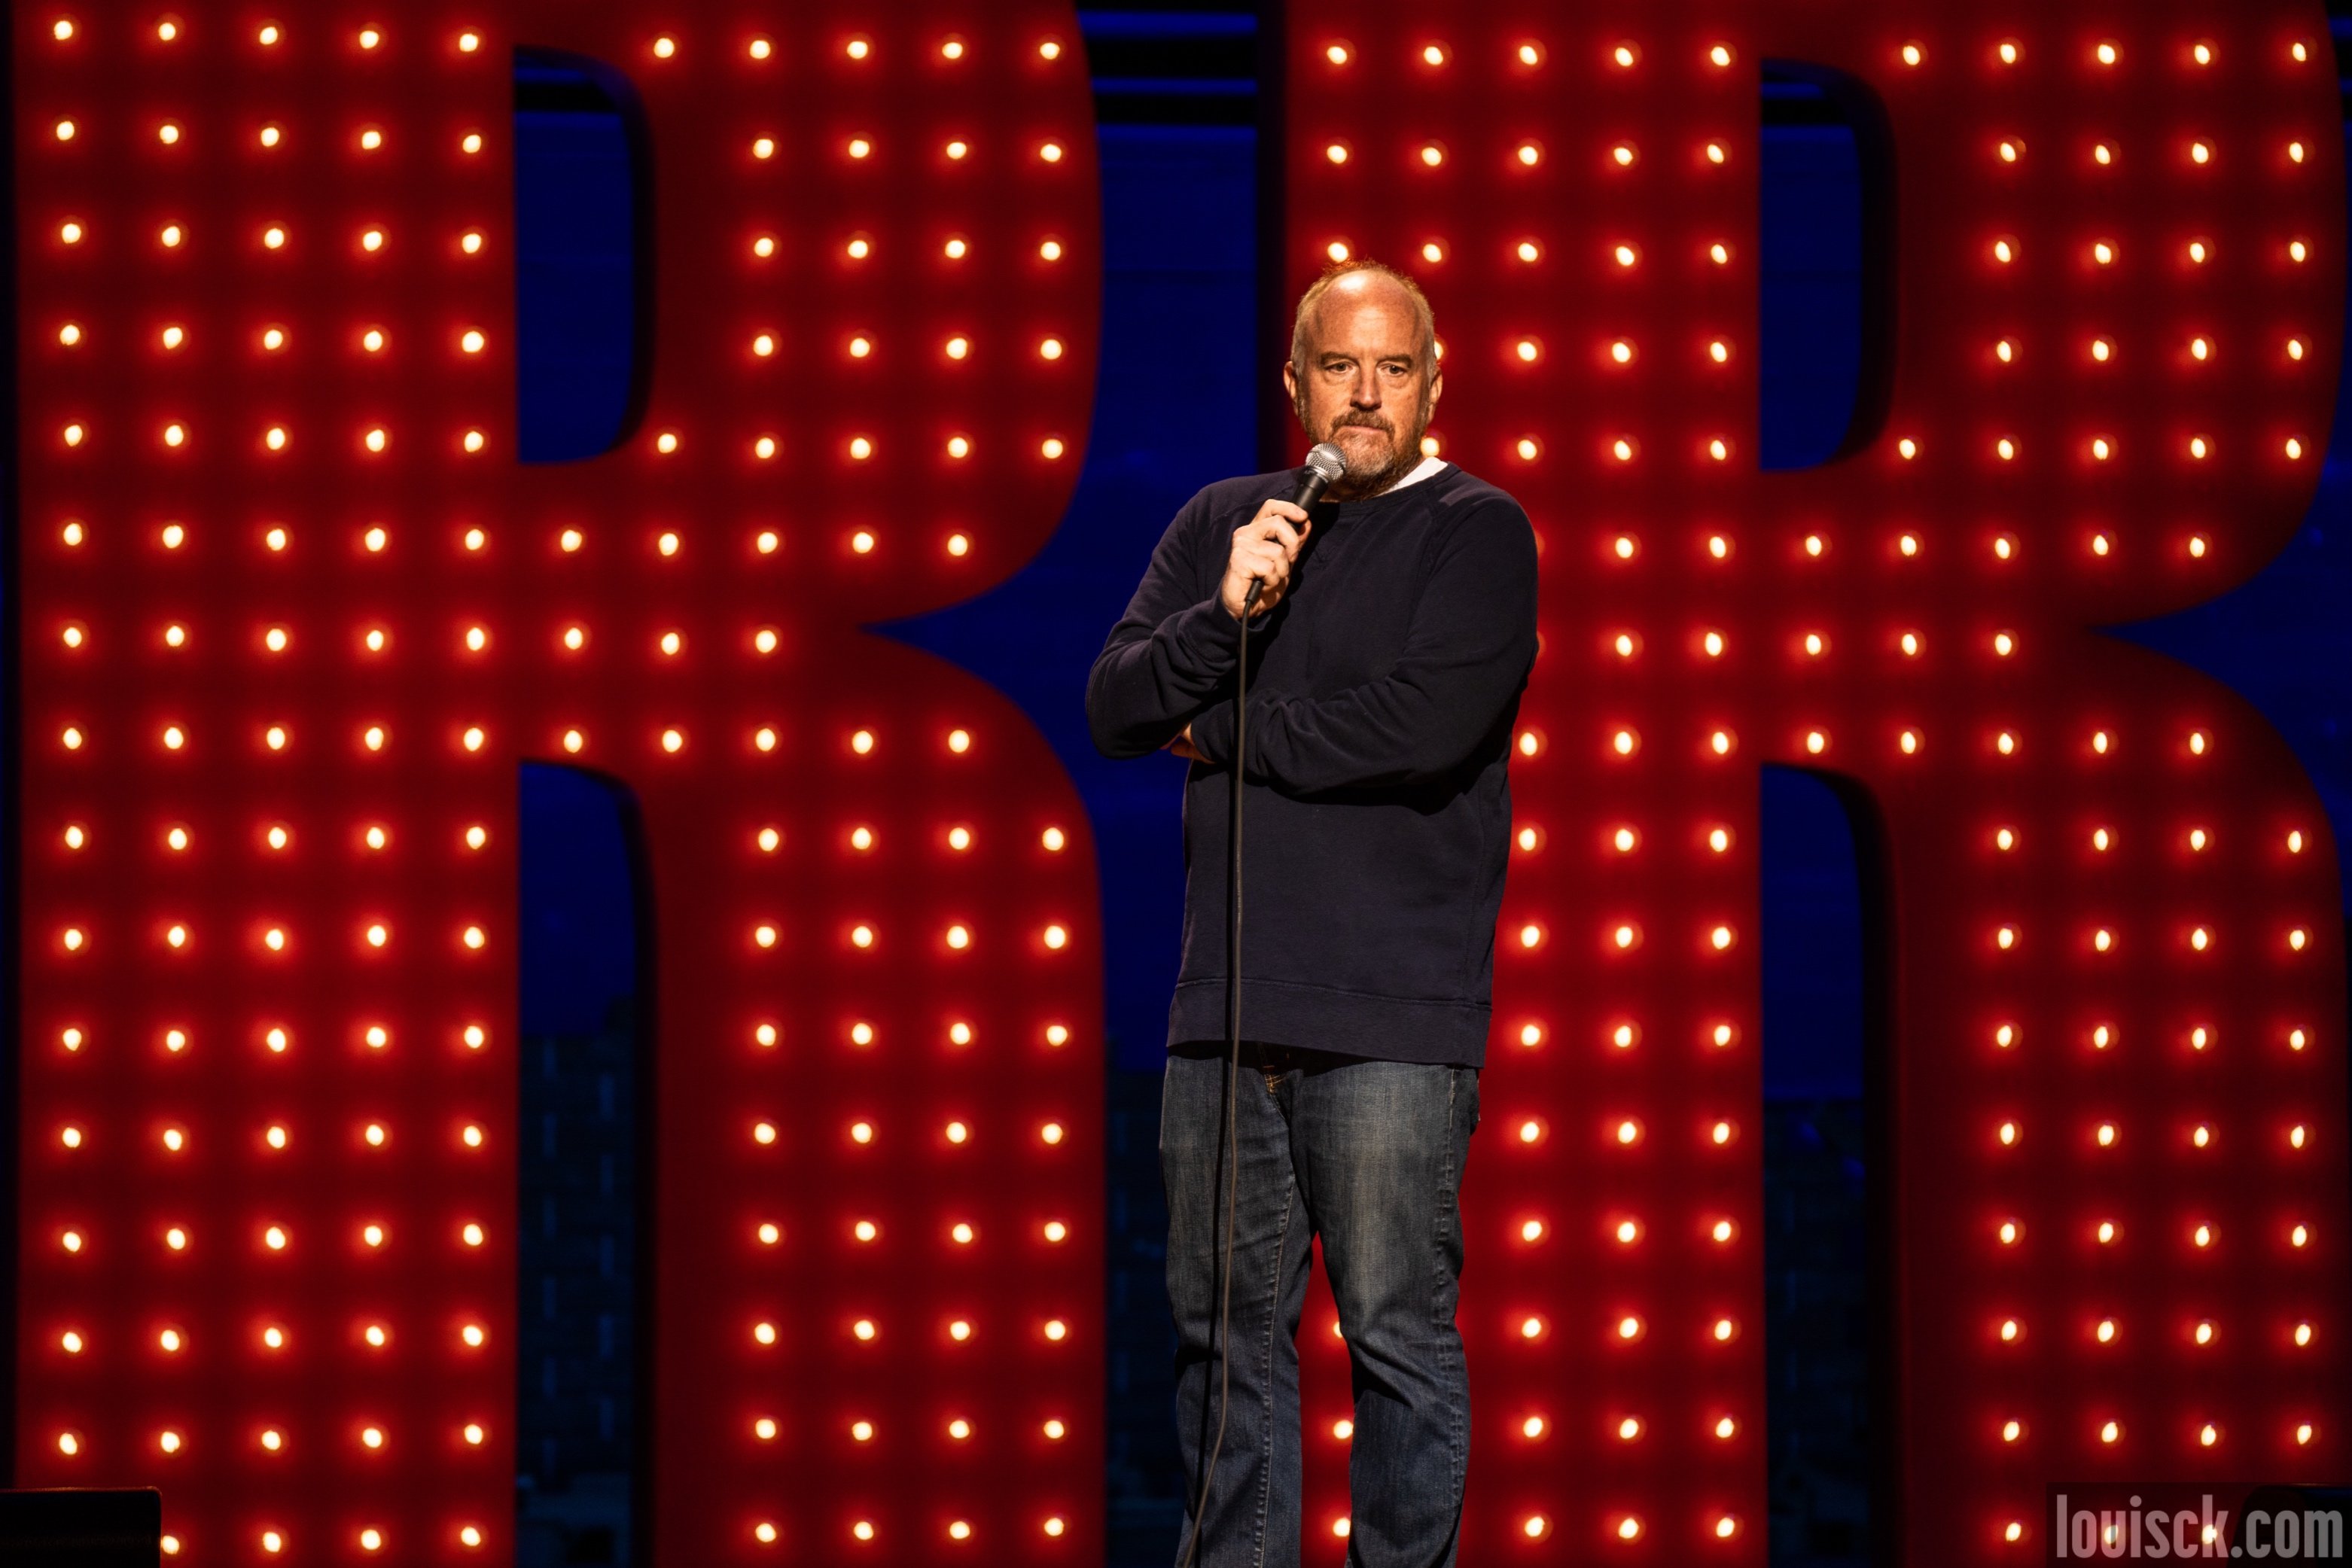 Photo 3 in 'LOUIS C.K. at MADISON SQUARE GARDEN' gallery showcasing lighting design by Mike Baldassari of Mike-O-Matic Industries LLC